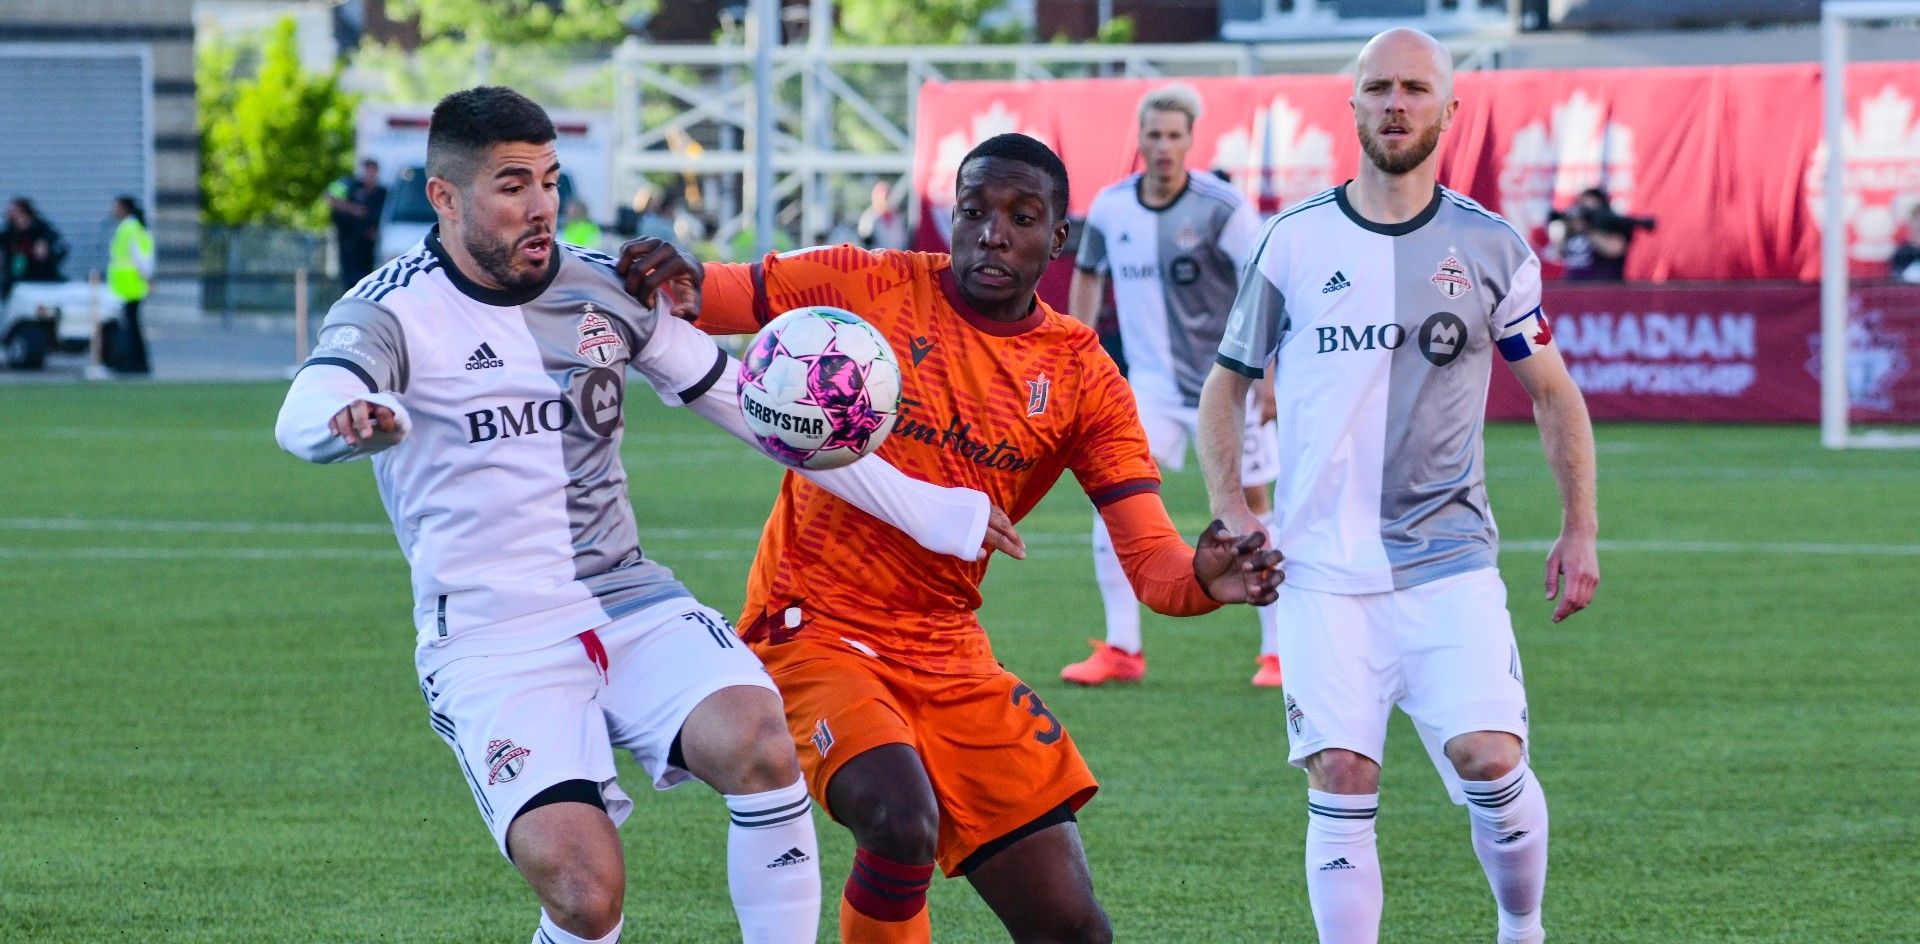 Toronto FC vs. Forge FC: 3 takeaways from CanChamp final